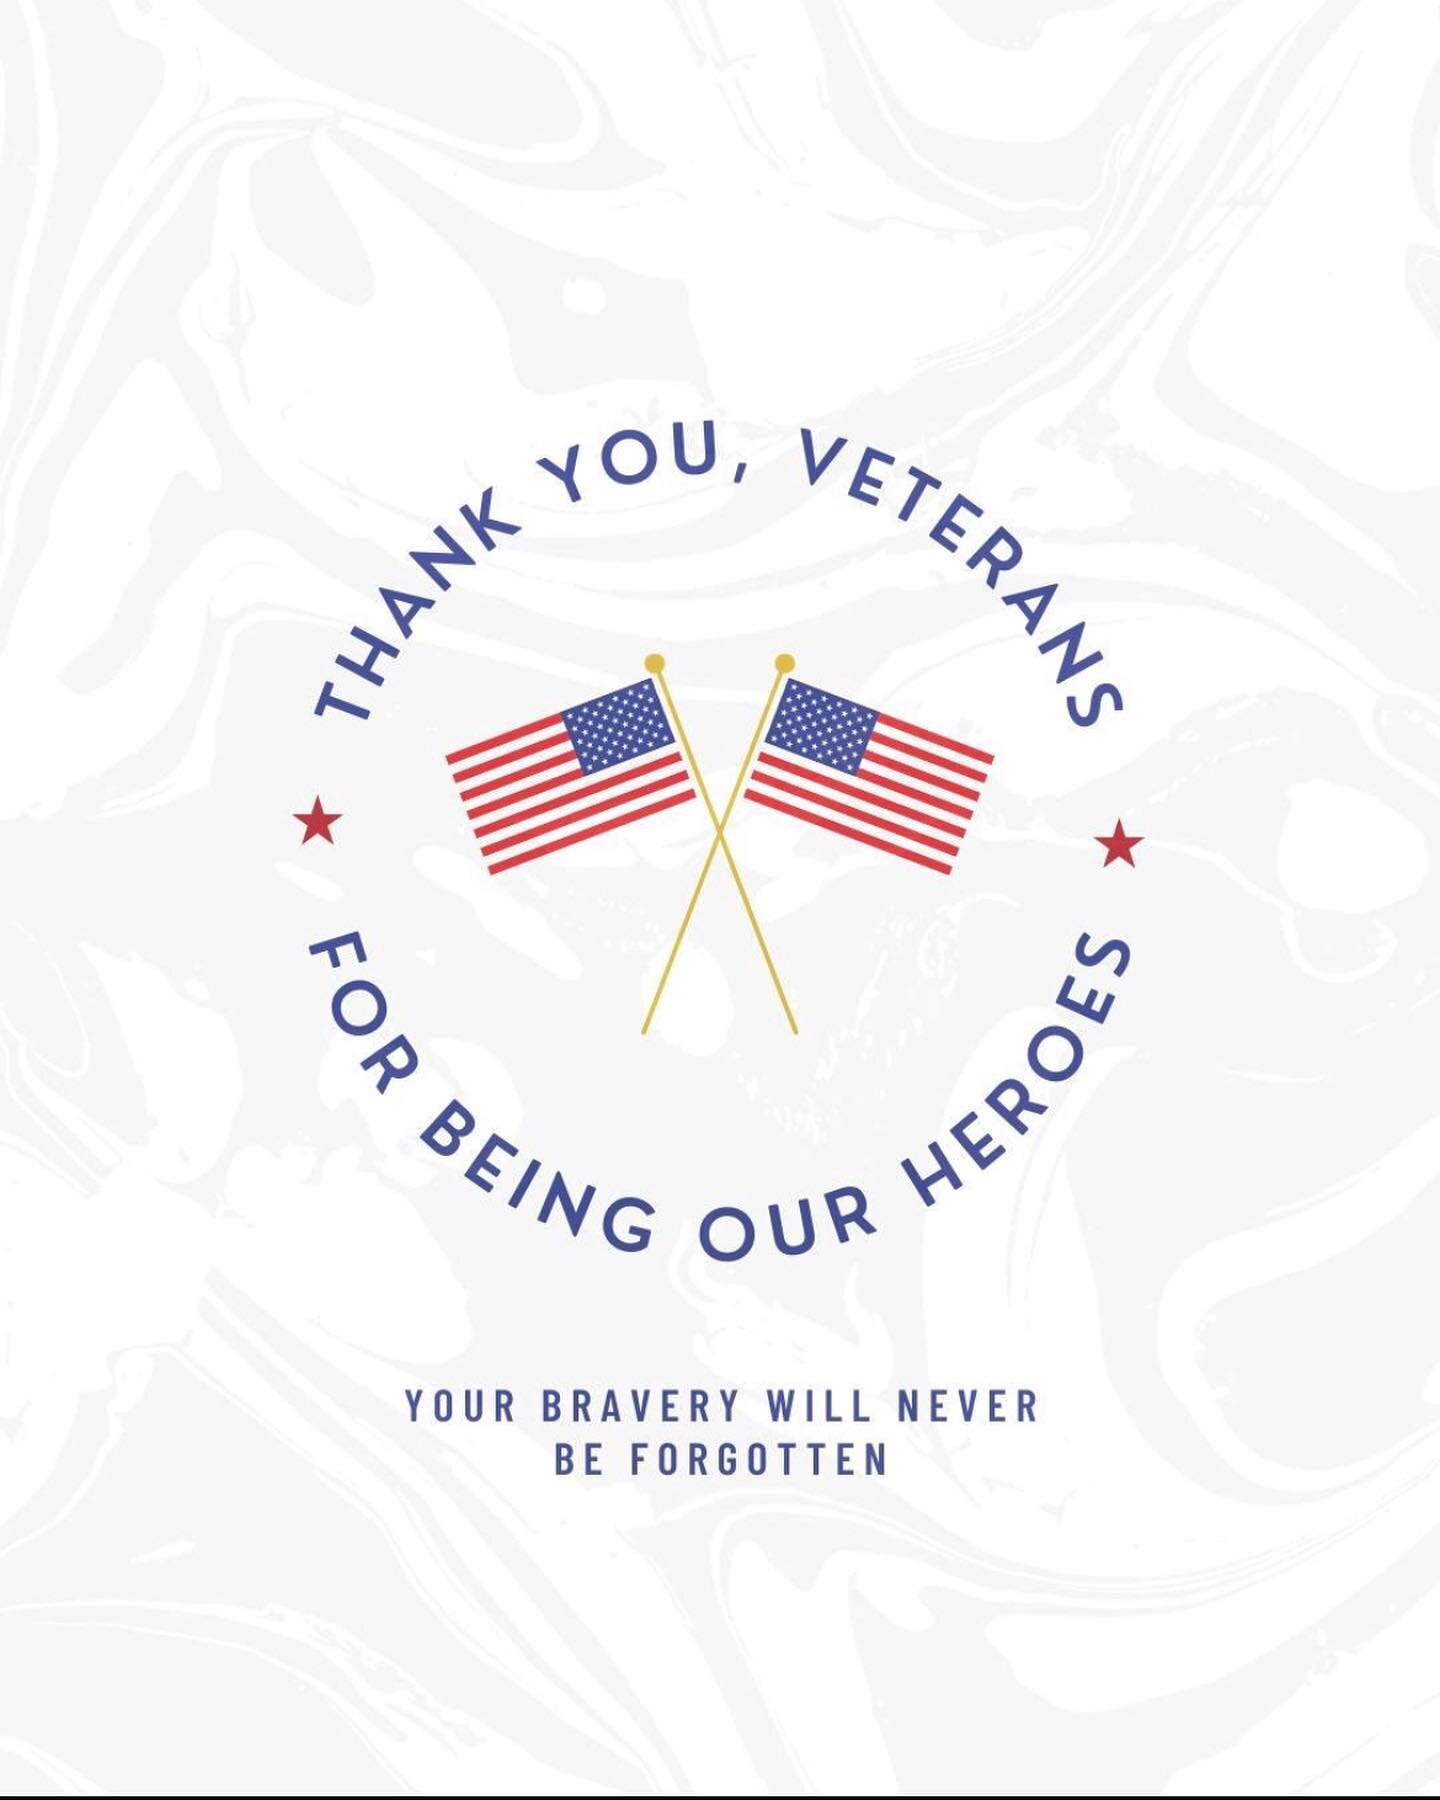 Happy Veterans Day! We spend the day commemorating and honoring those who have served our country and fought for our freedom. ❤️🤍💙 
&bull;
&bull;
&bull;
&bull;

#veteransday #veteranowned #veteranownedbusiness #hollister #sanbenitocounty #framing #